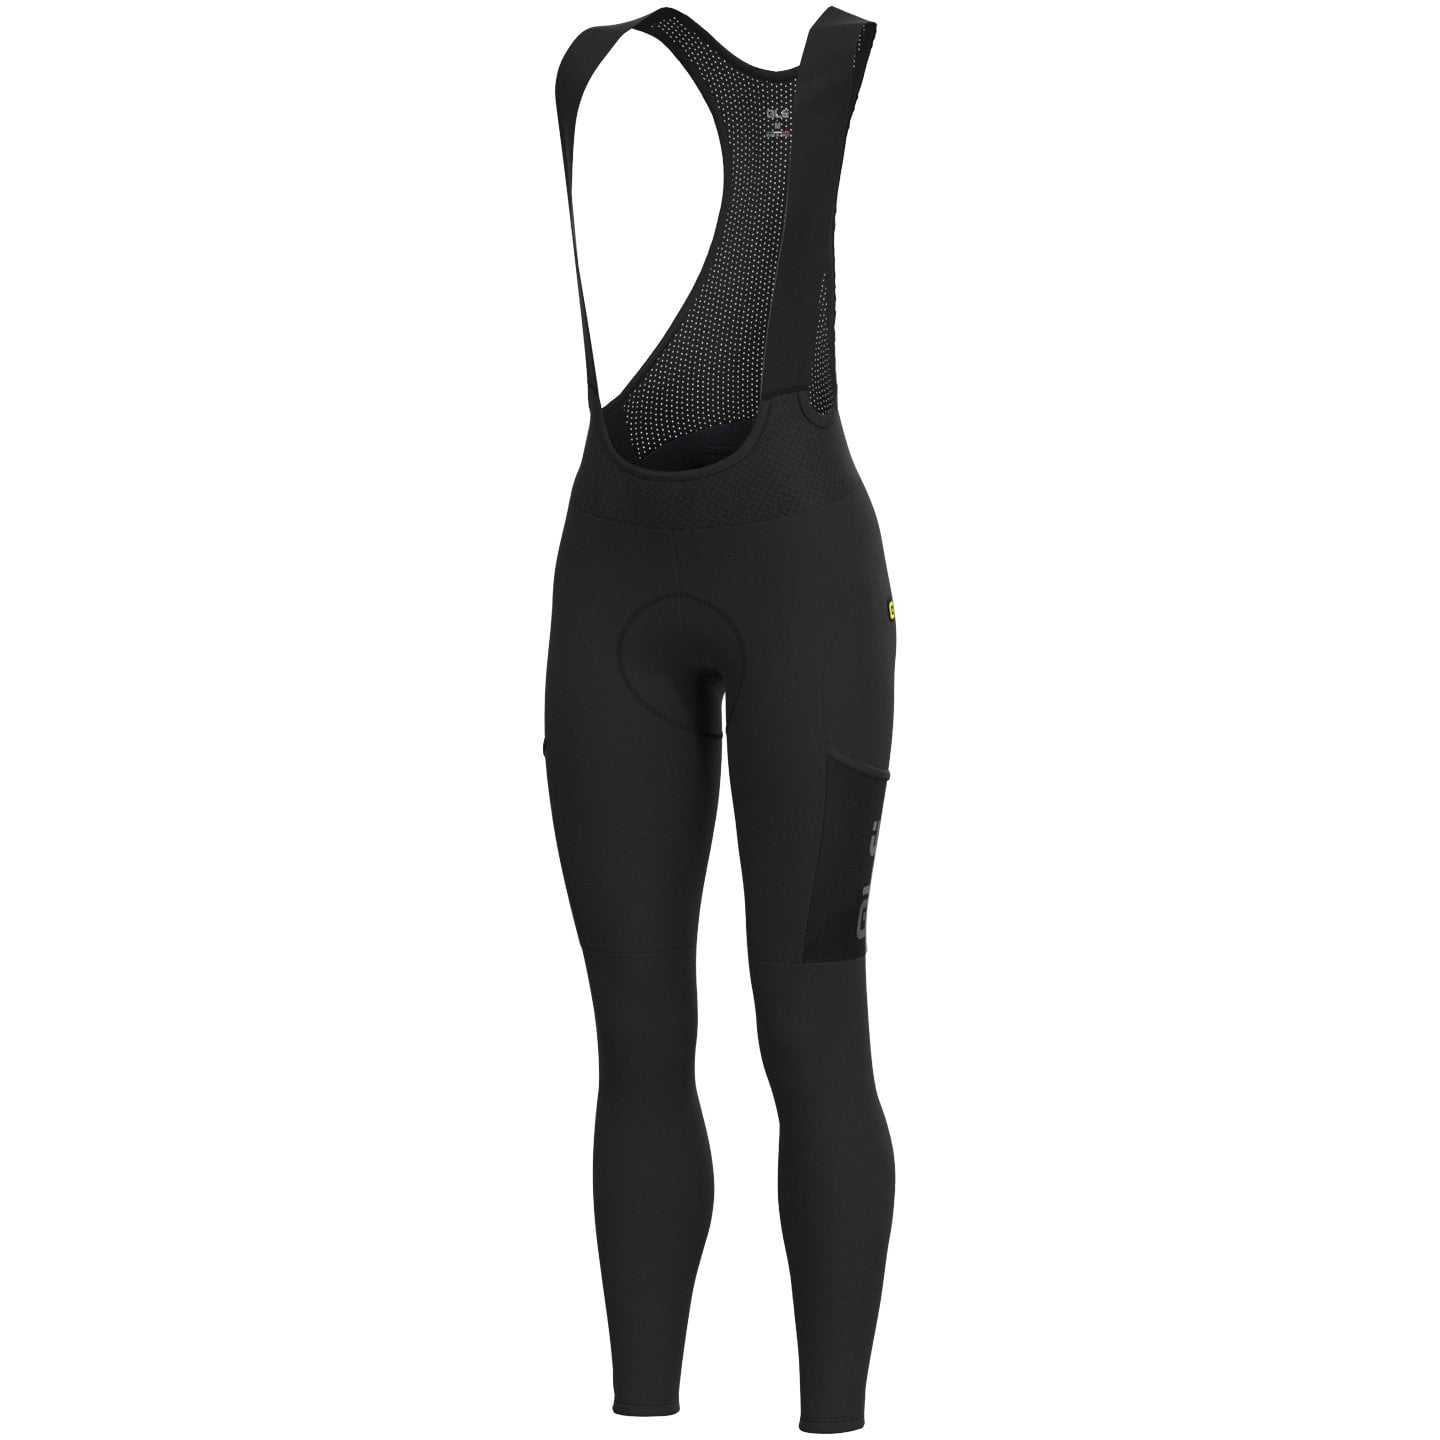 ALE Stones Cargo Women’s Bib Tights Women’s Bib Tights, size M, Cycle tights, Cycling clothing